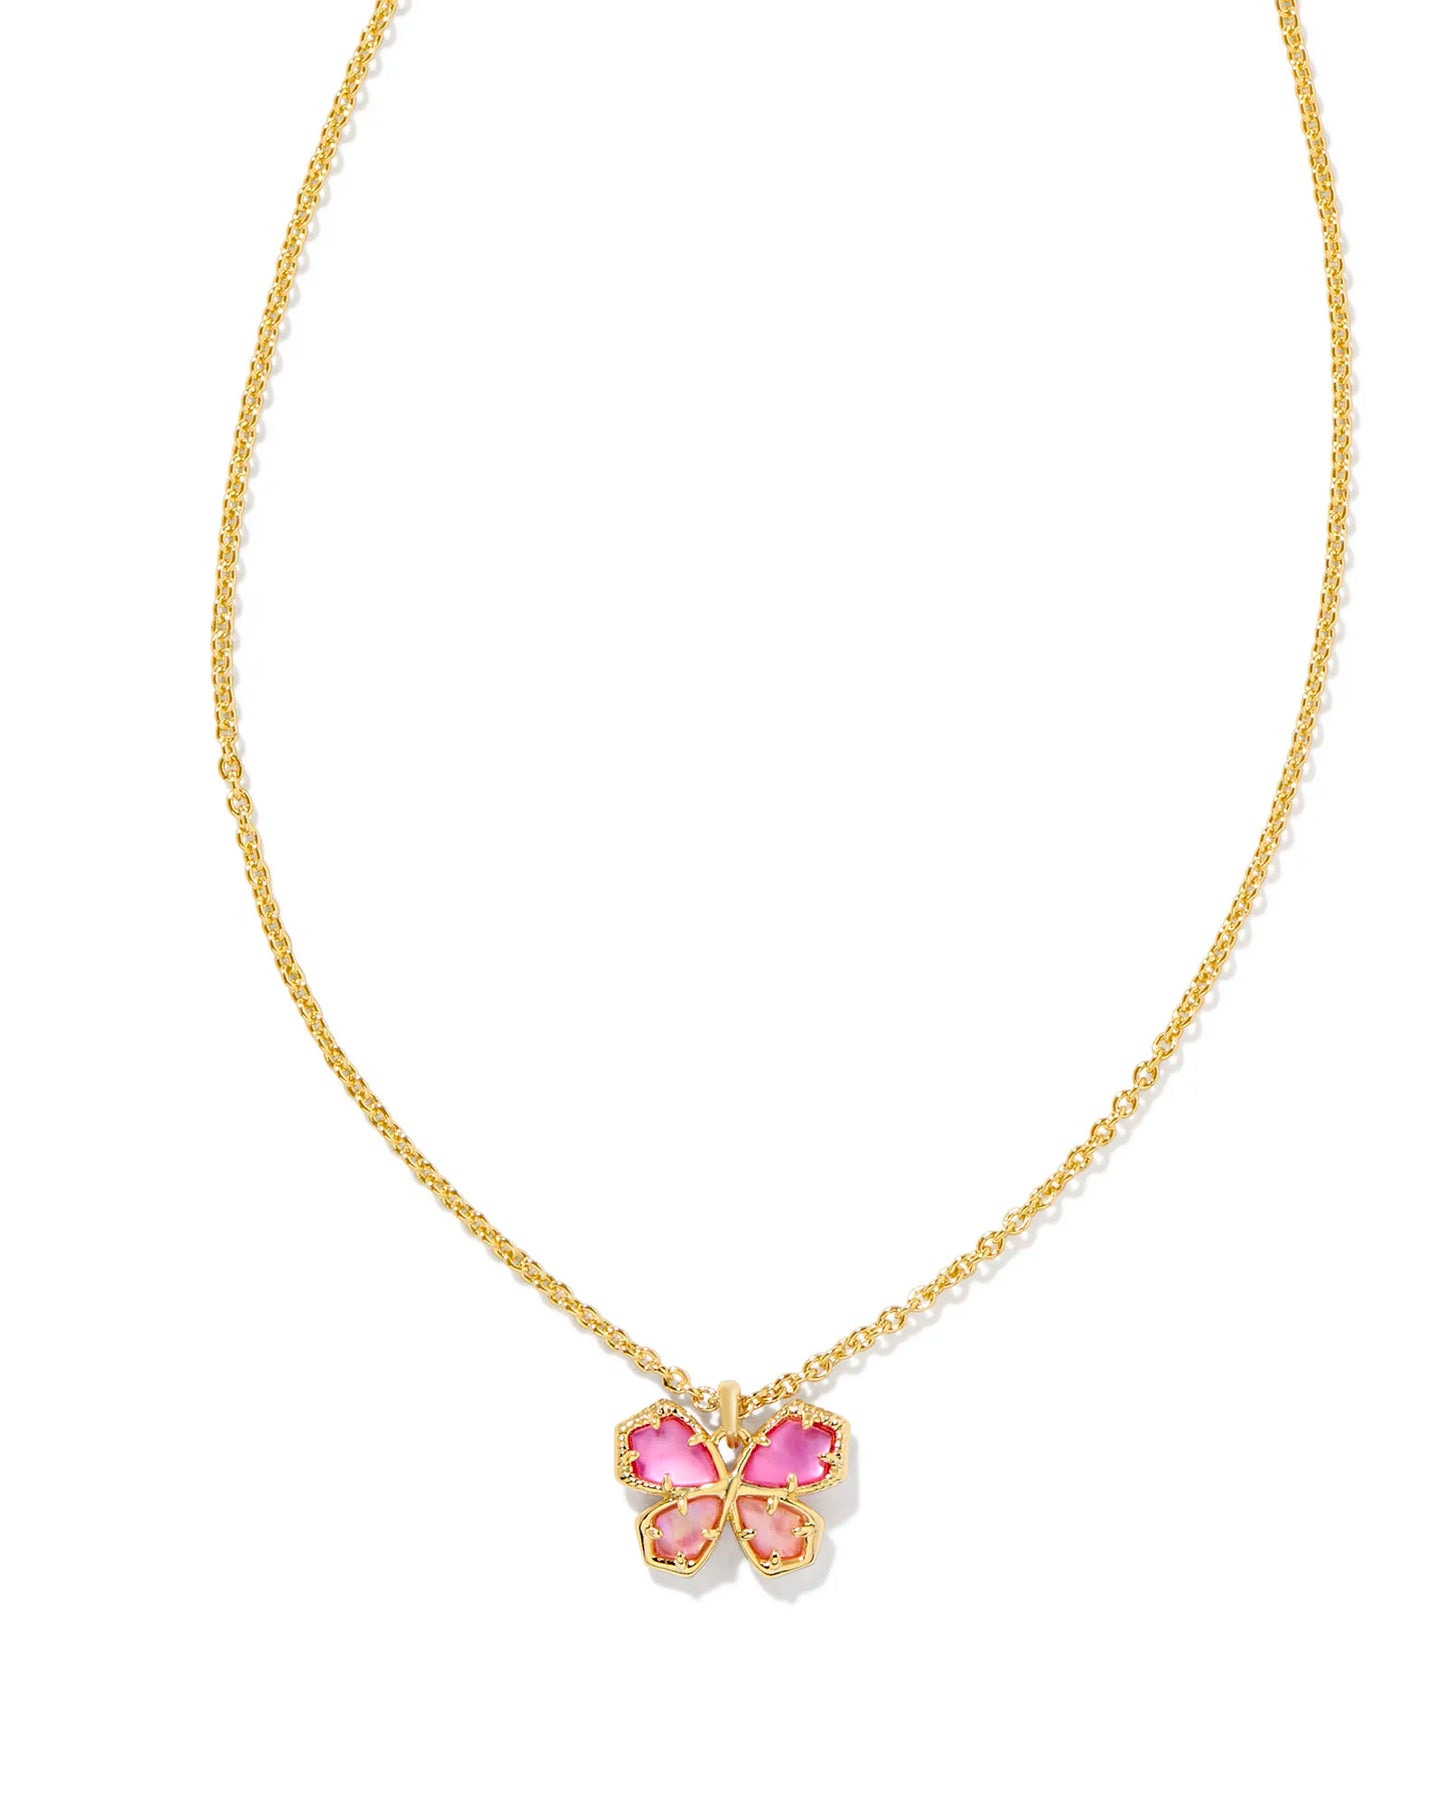 gold necklace with a butterfly charm in a pink mix stone 19" Chain, 0.63"L X 0.5"W Pendant